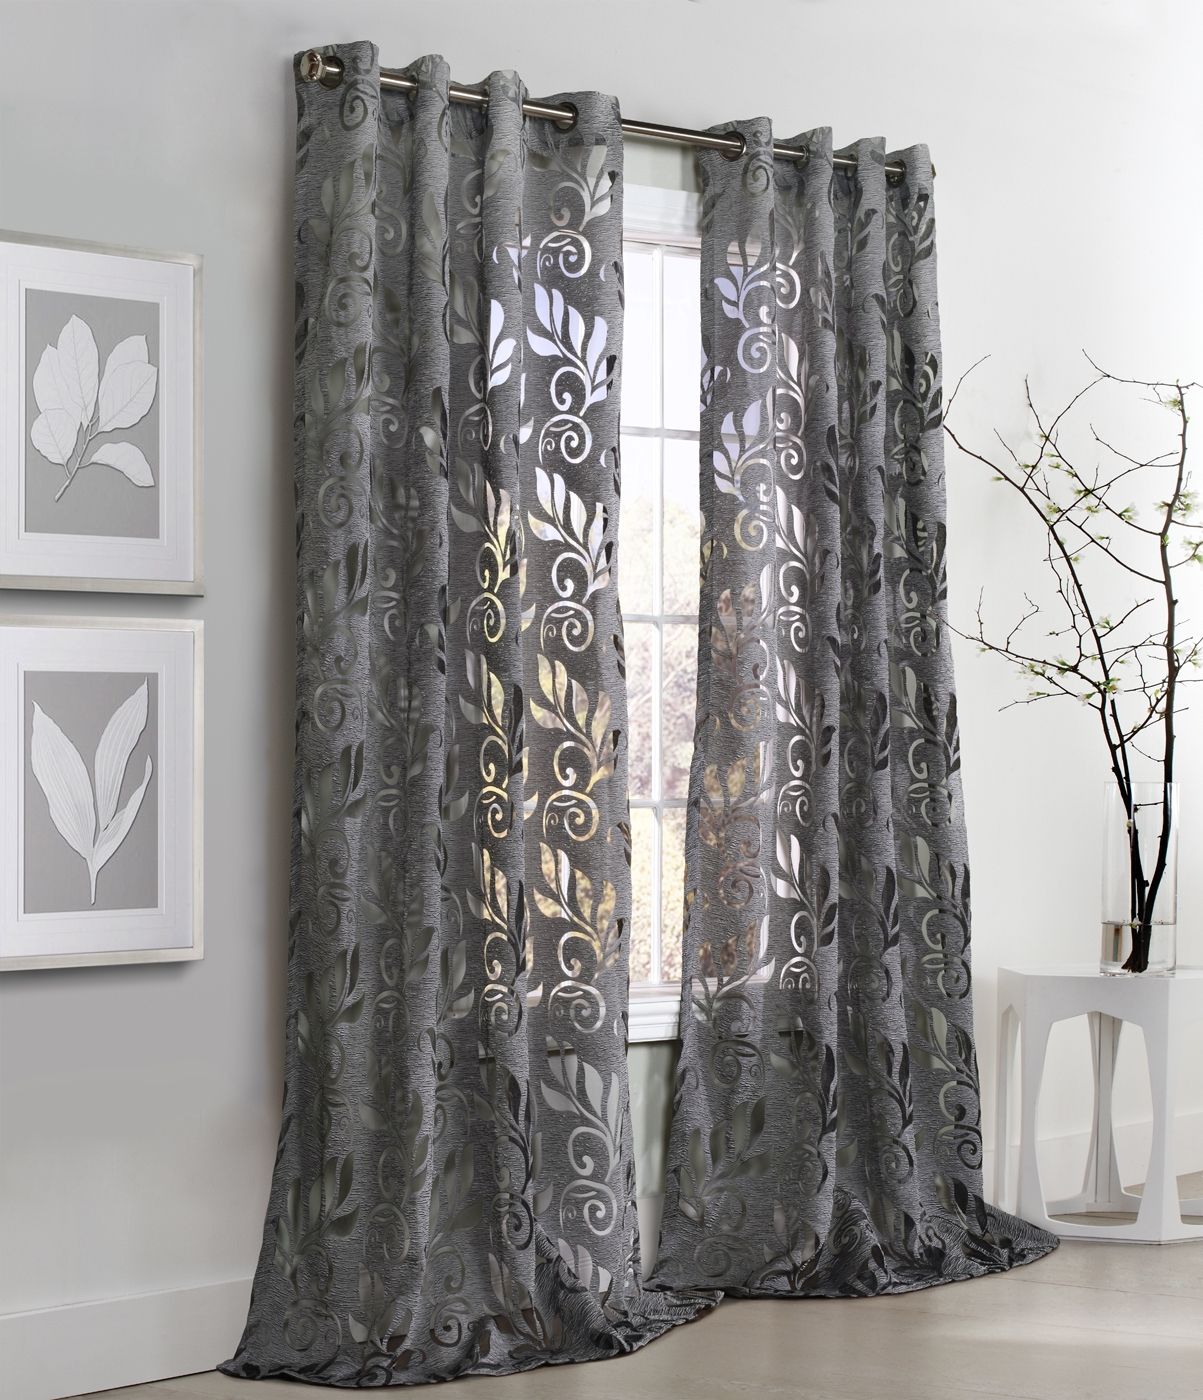 Curtain Good Grommet Curtain Panels Drapes Vs Curtains Green Inside Pattern Curtain Panels (View 7 of 25)